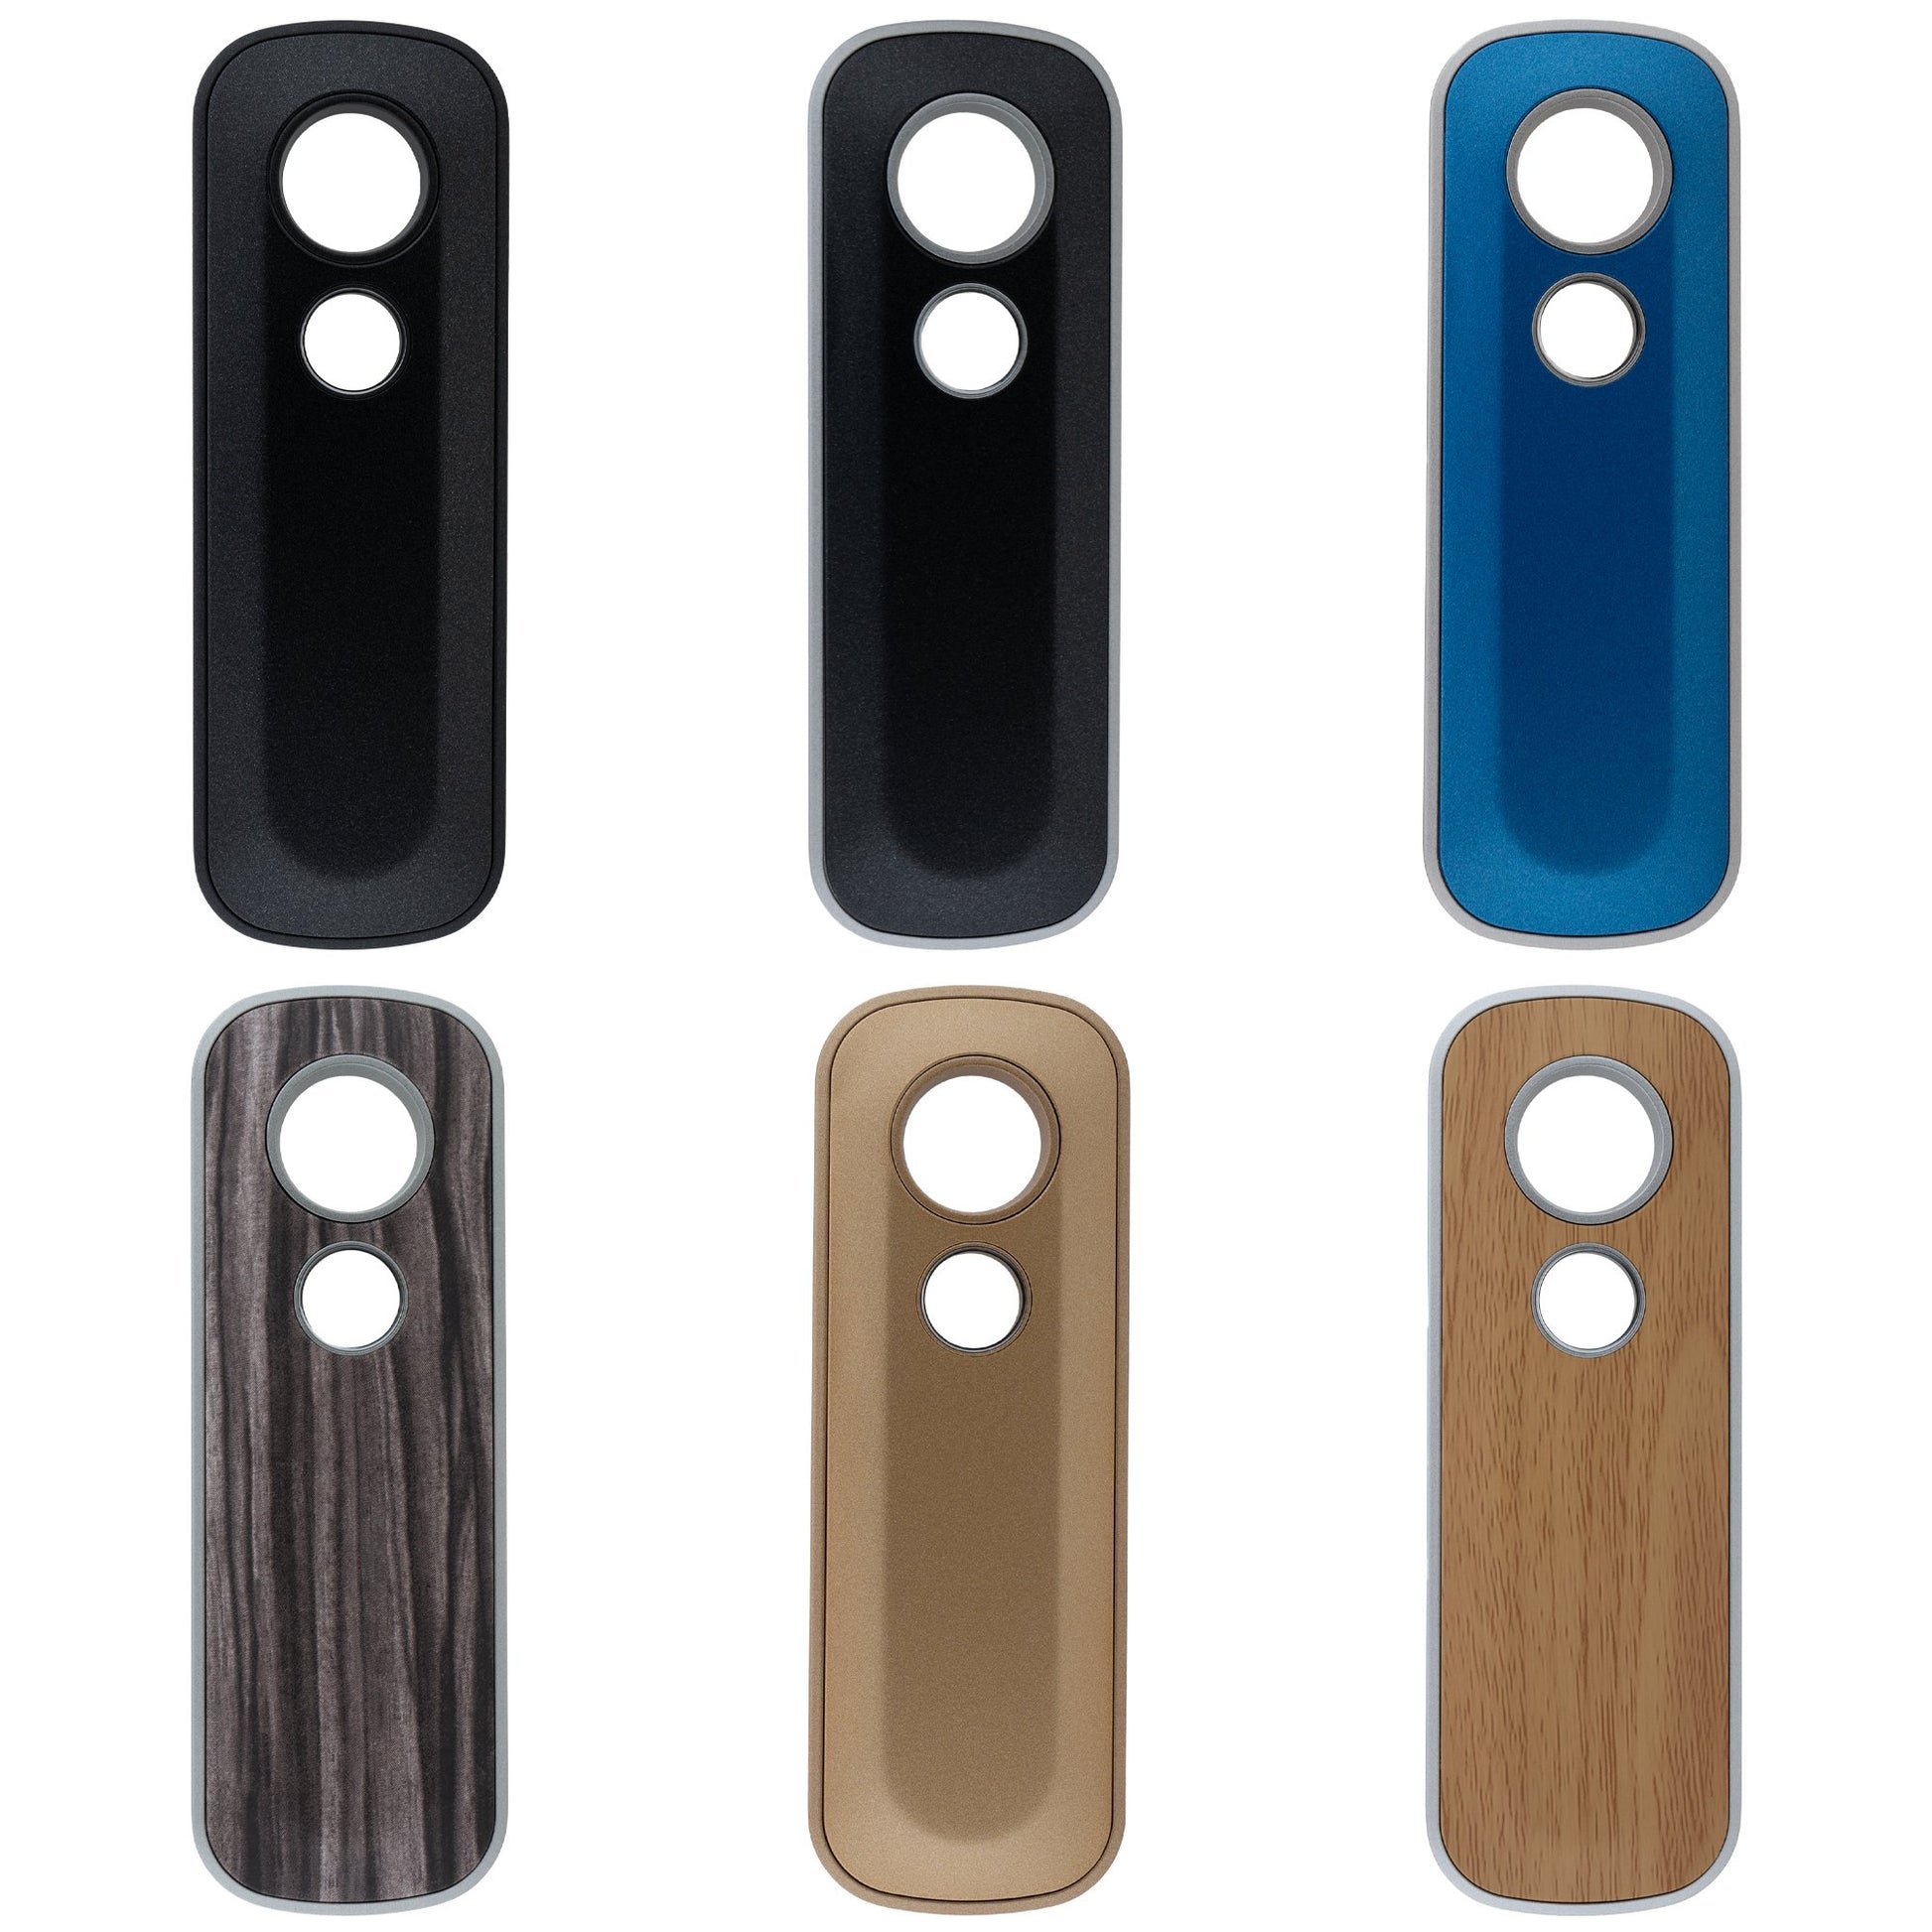 Firefly 2+ Top Lid Vaporizers FireFly 